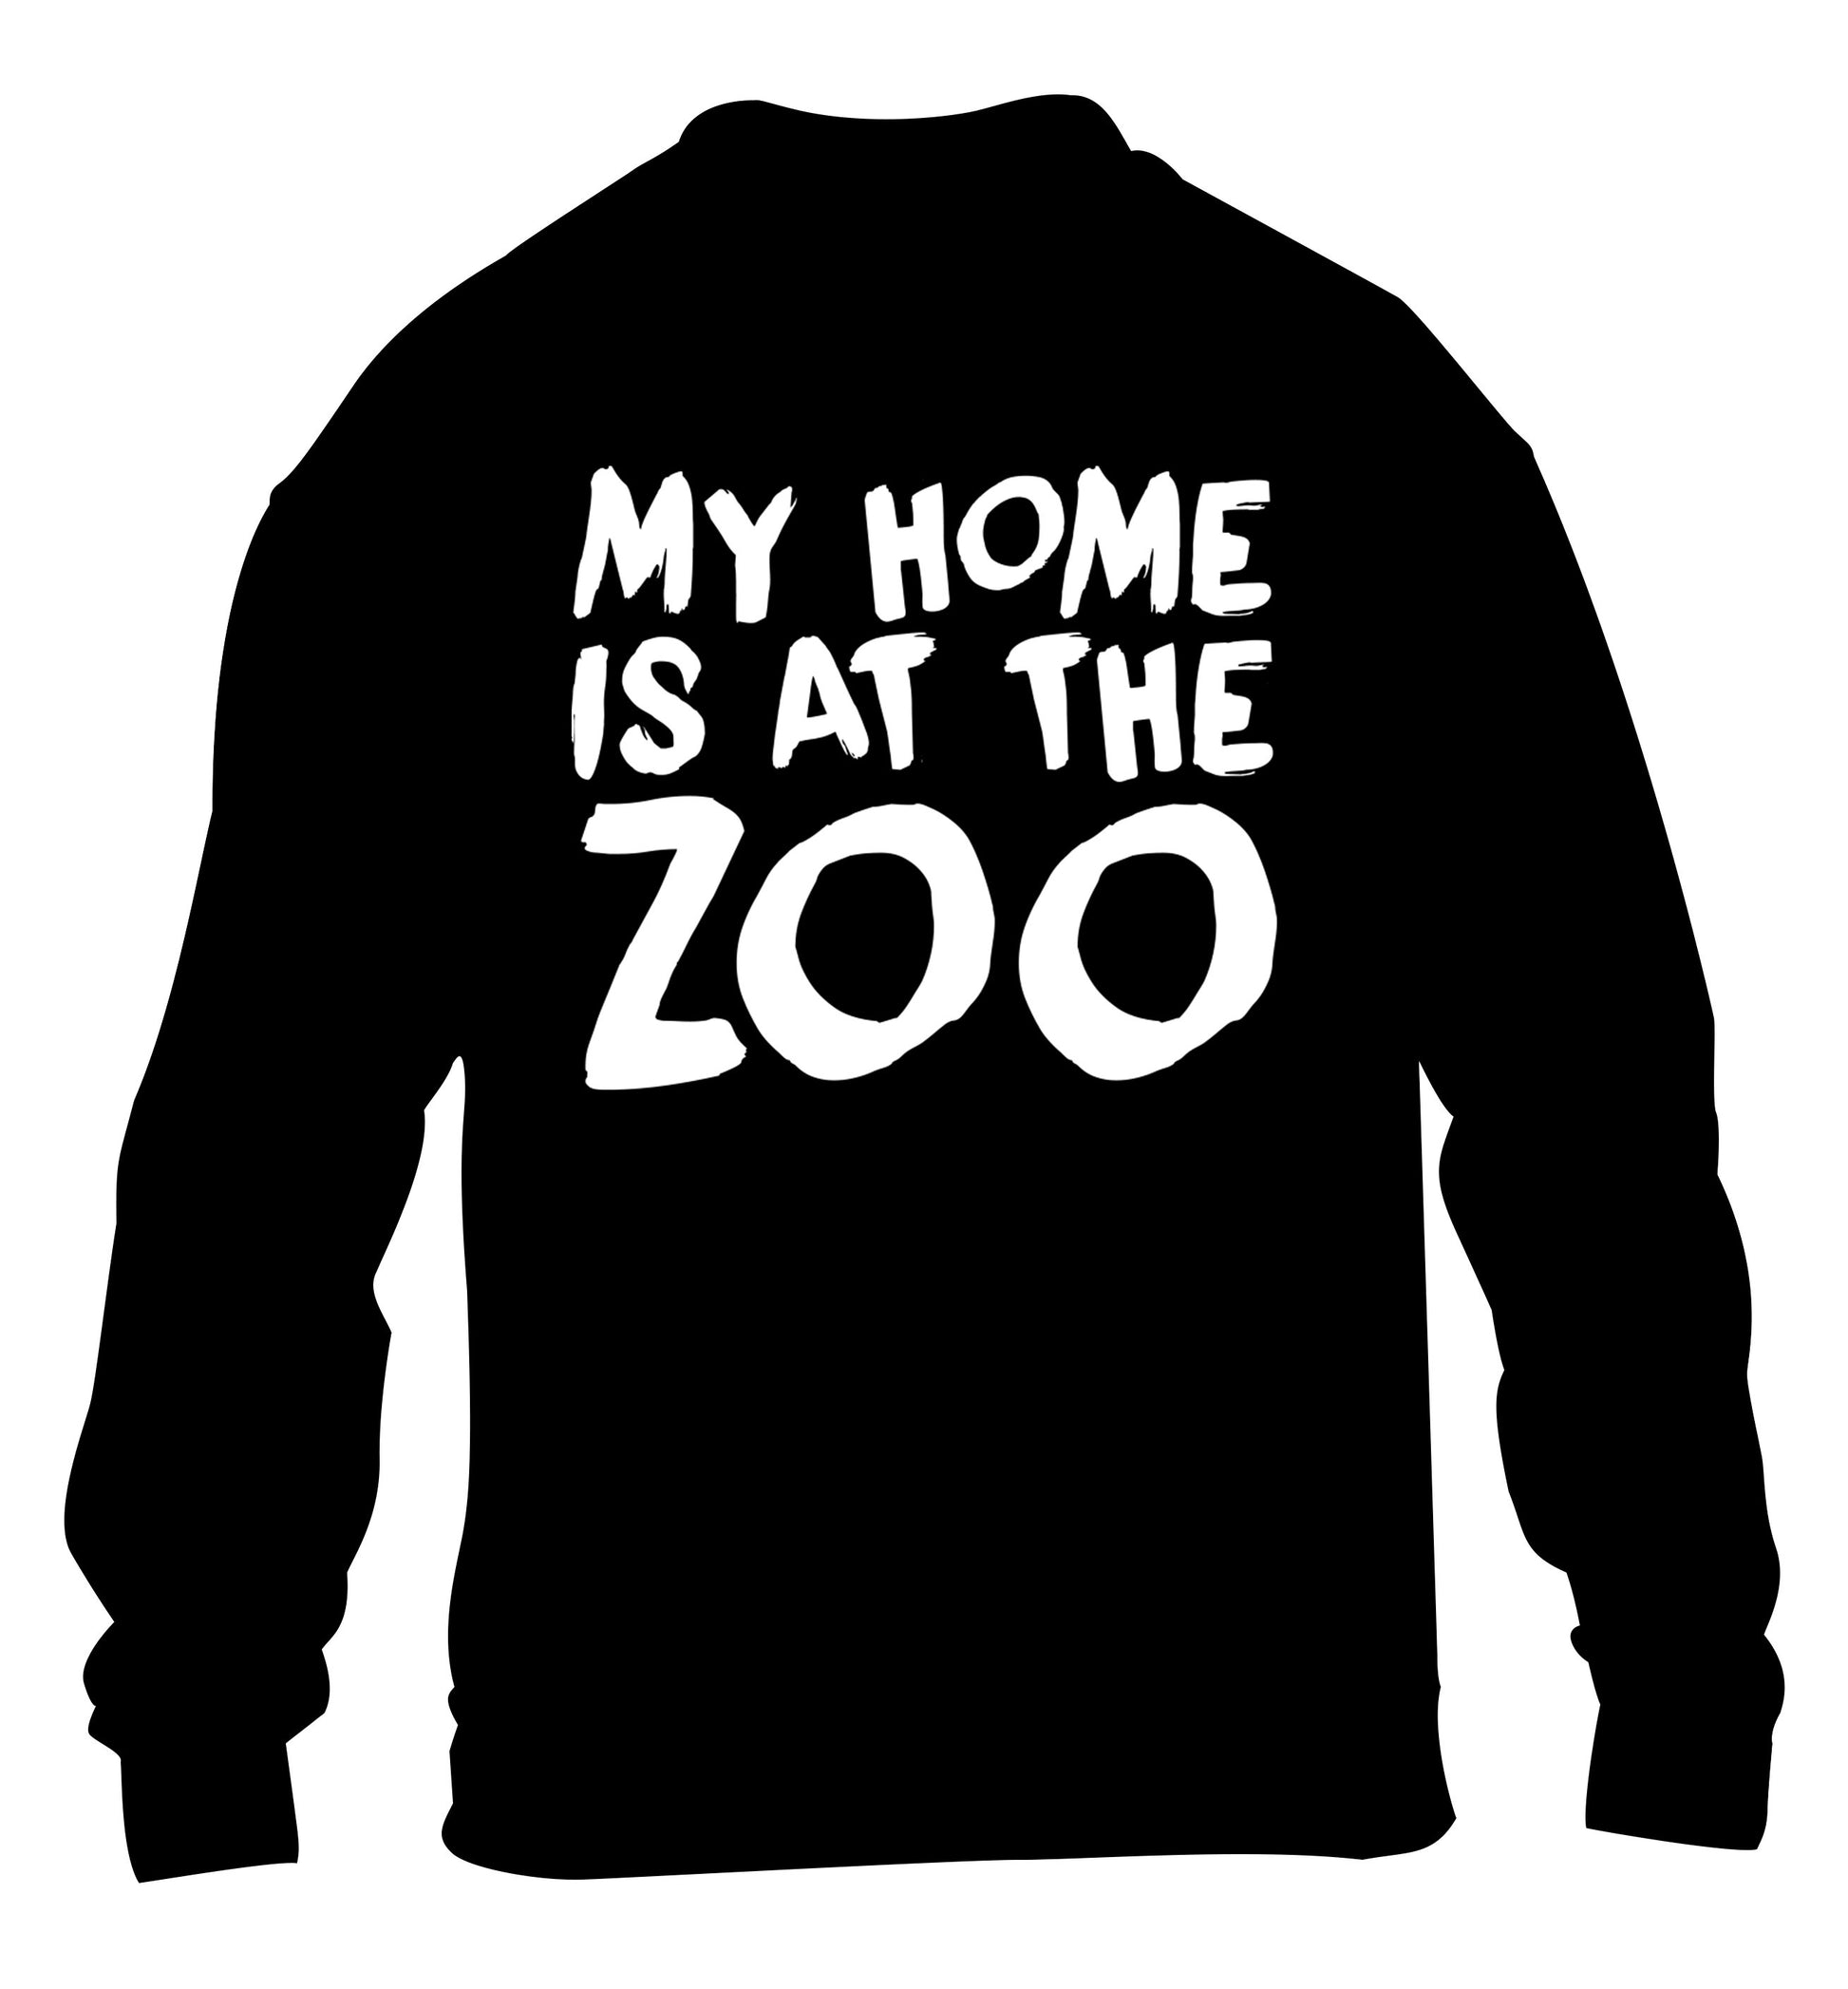 My home is at the zoo children's black sweater 12-14 Years